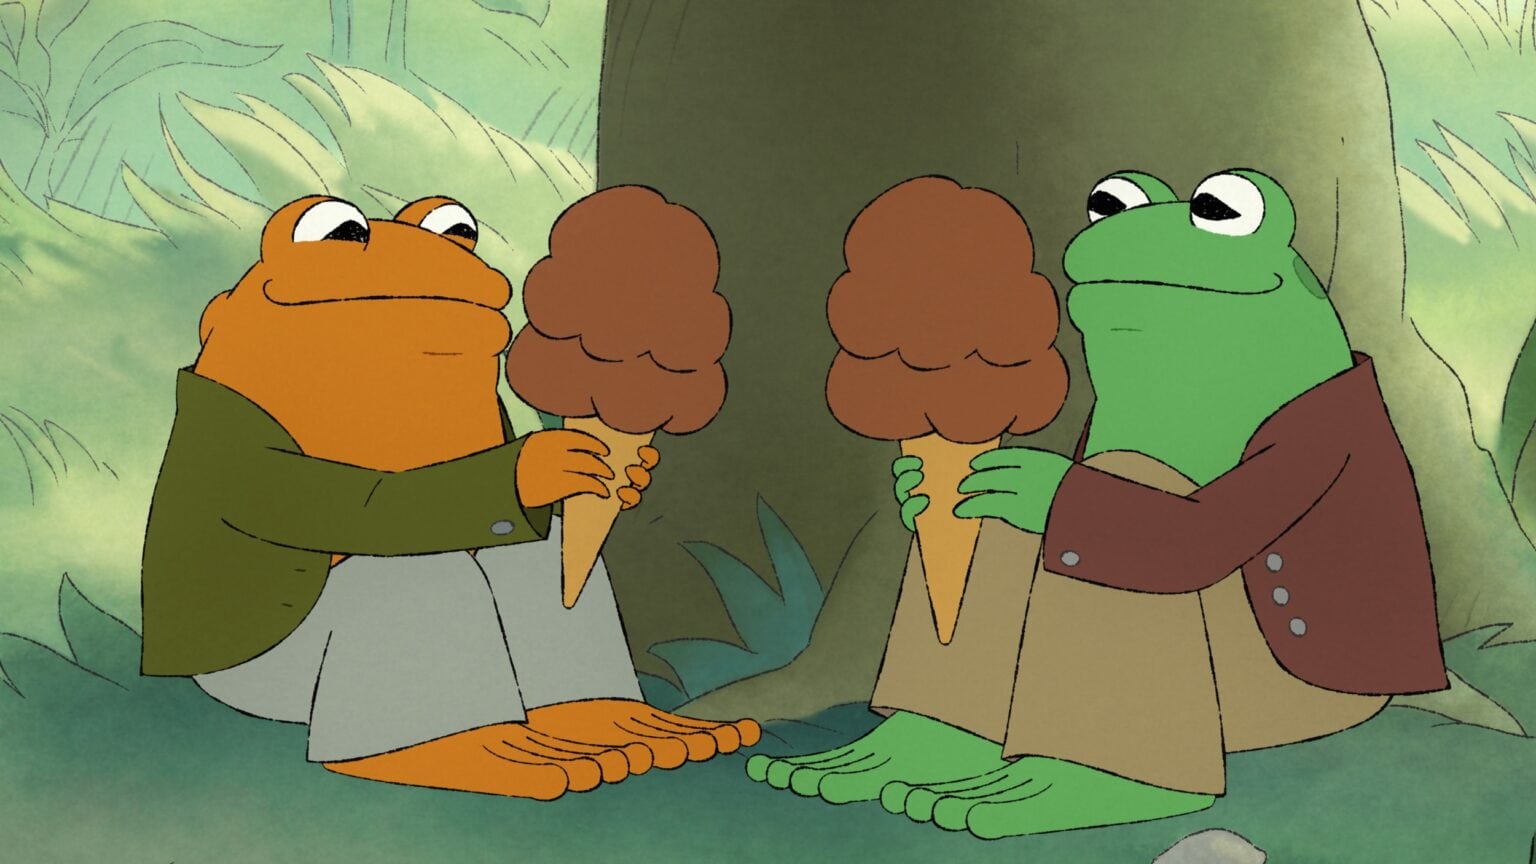 Episode 2. Toad (voiced by Kevin Michael Richardson) and Frog (voiced by Nat Faxon) in 